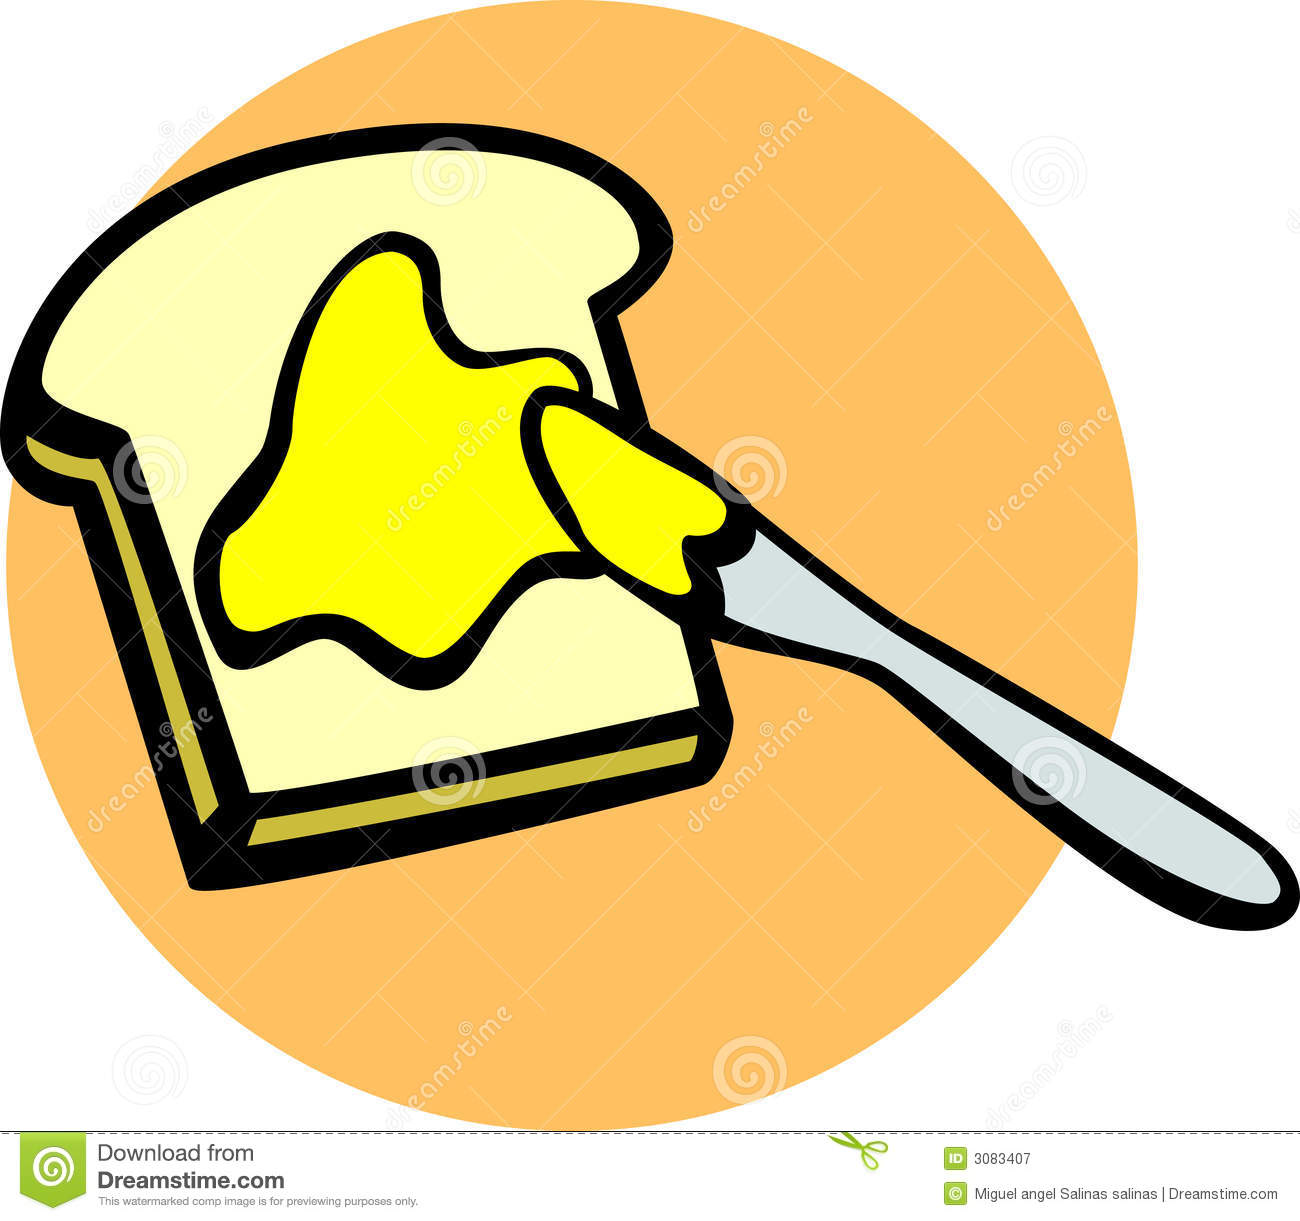 Toast With Butter And Knife Vector Illustration Royalty Free Stock